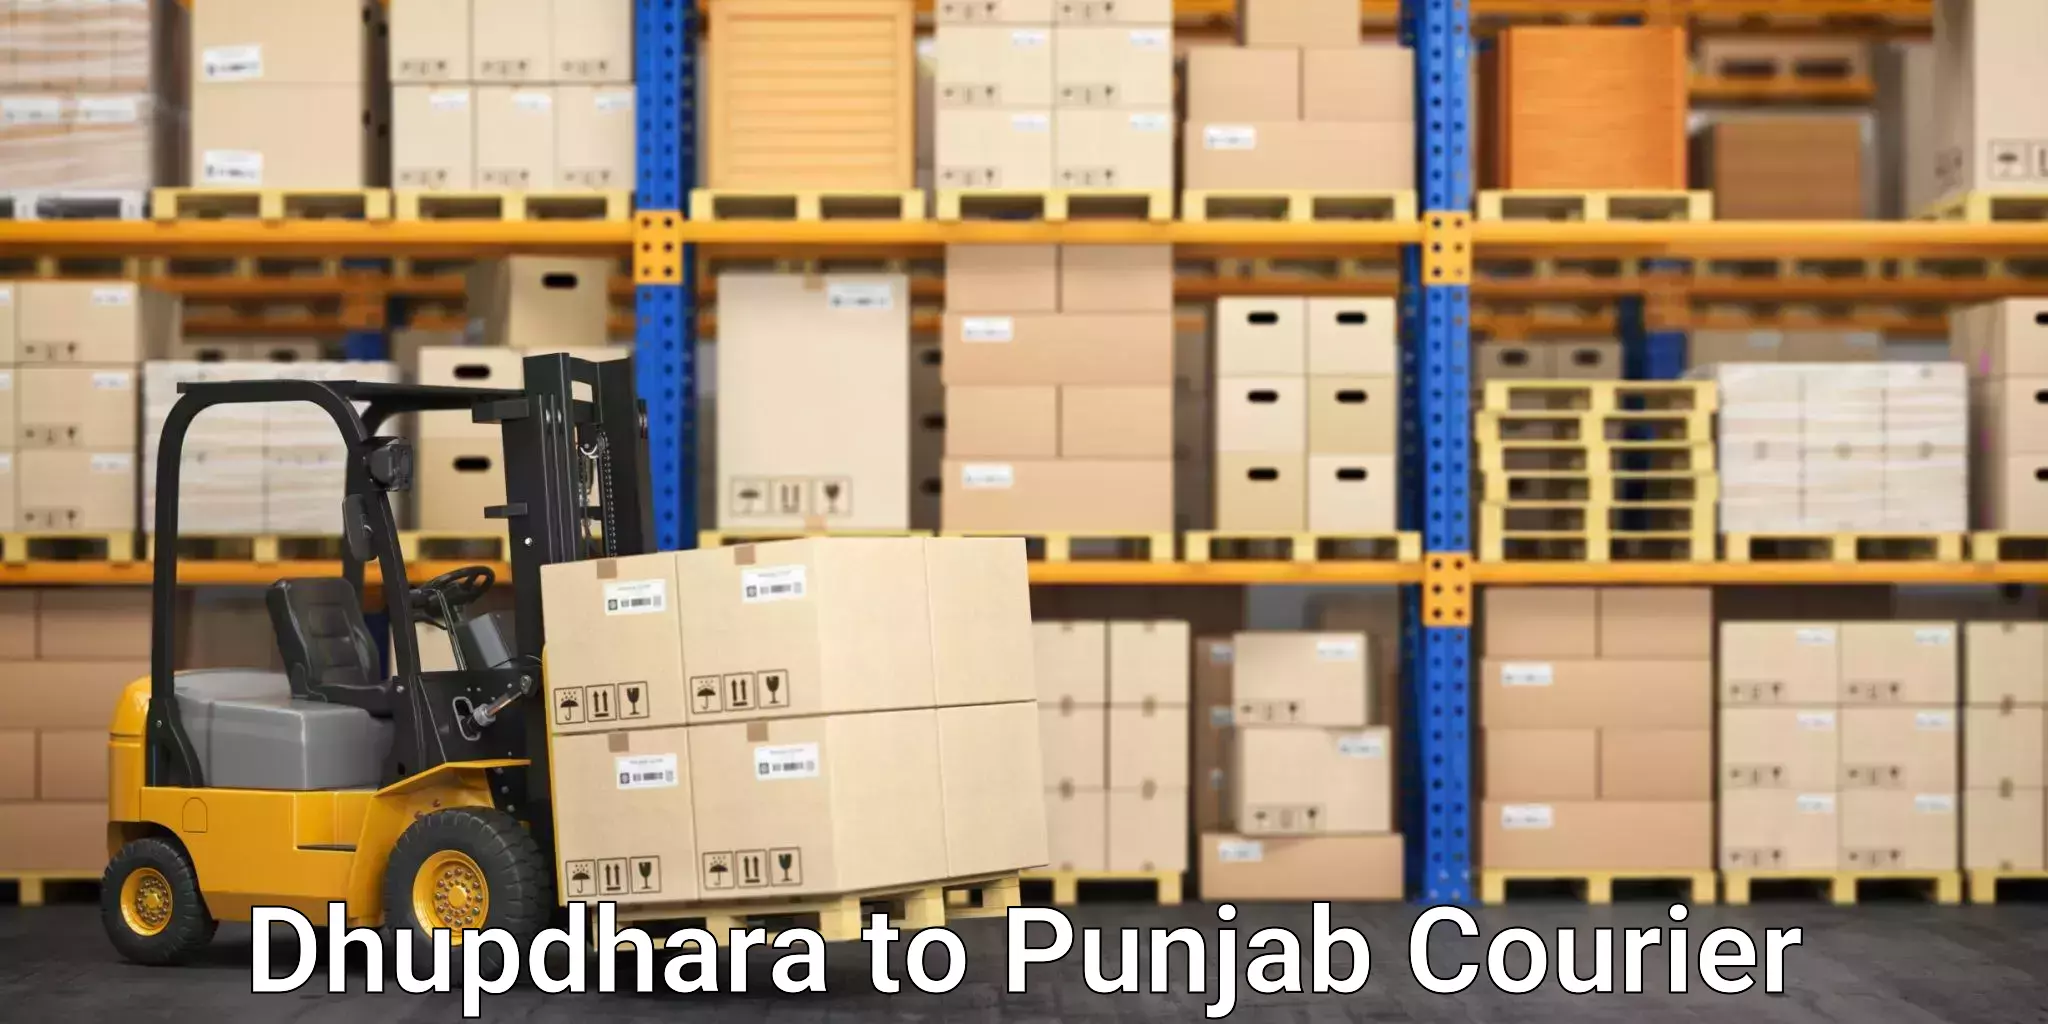 Automated parcel services Dhupdhara to Bathinda